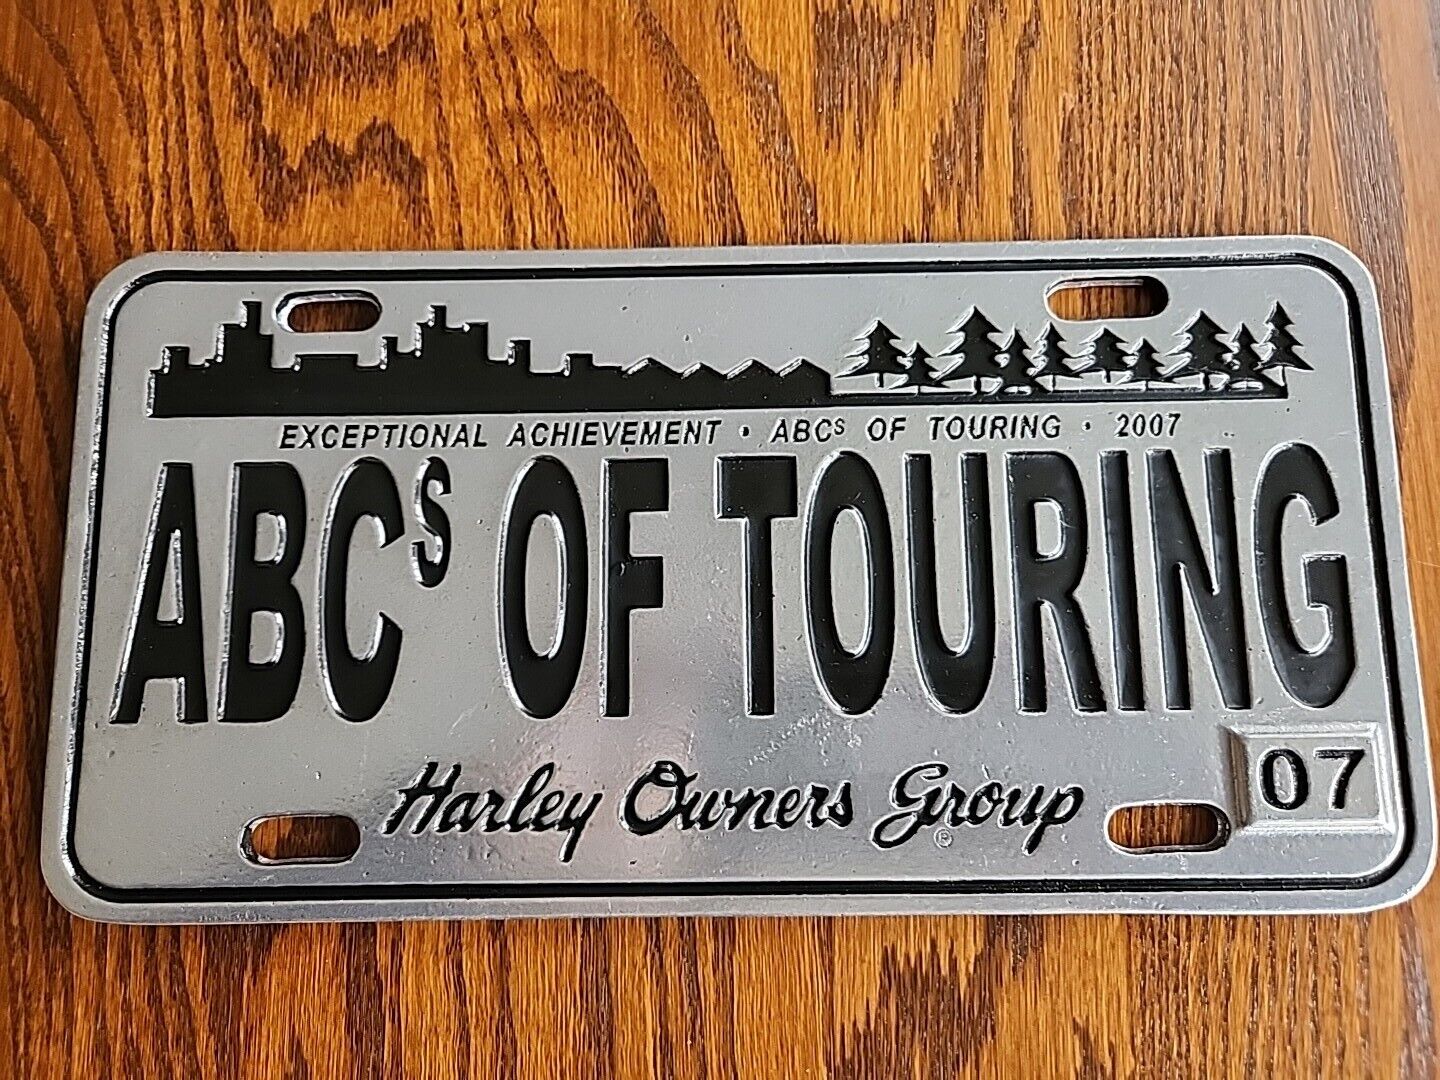 Harley Davidson ABC\'S of Touring Harley Owners Group Plate Exceptional 2007 NR 